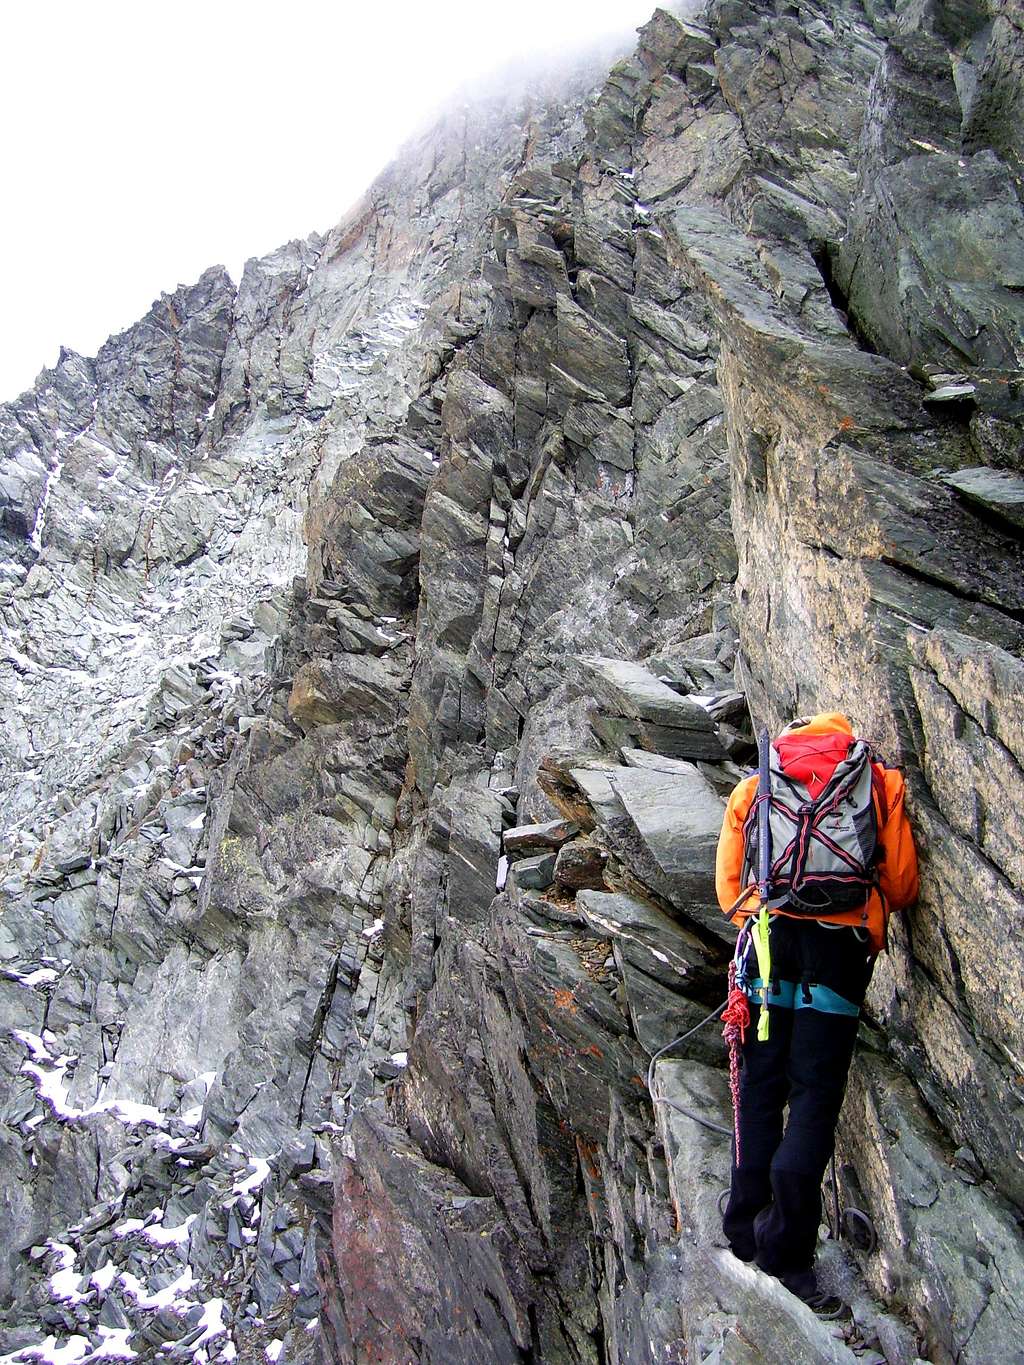 Exposed traverse